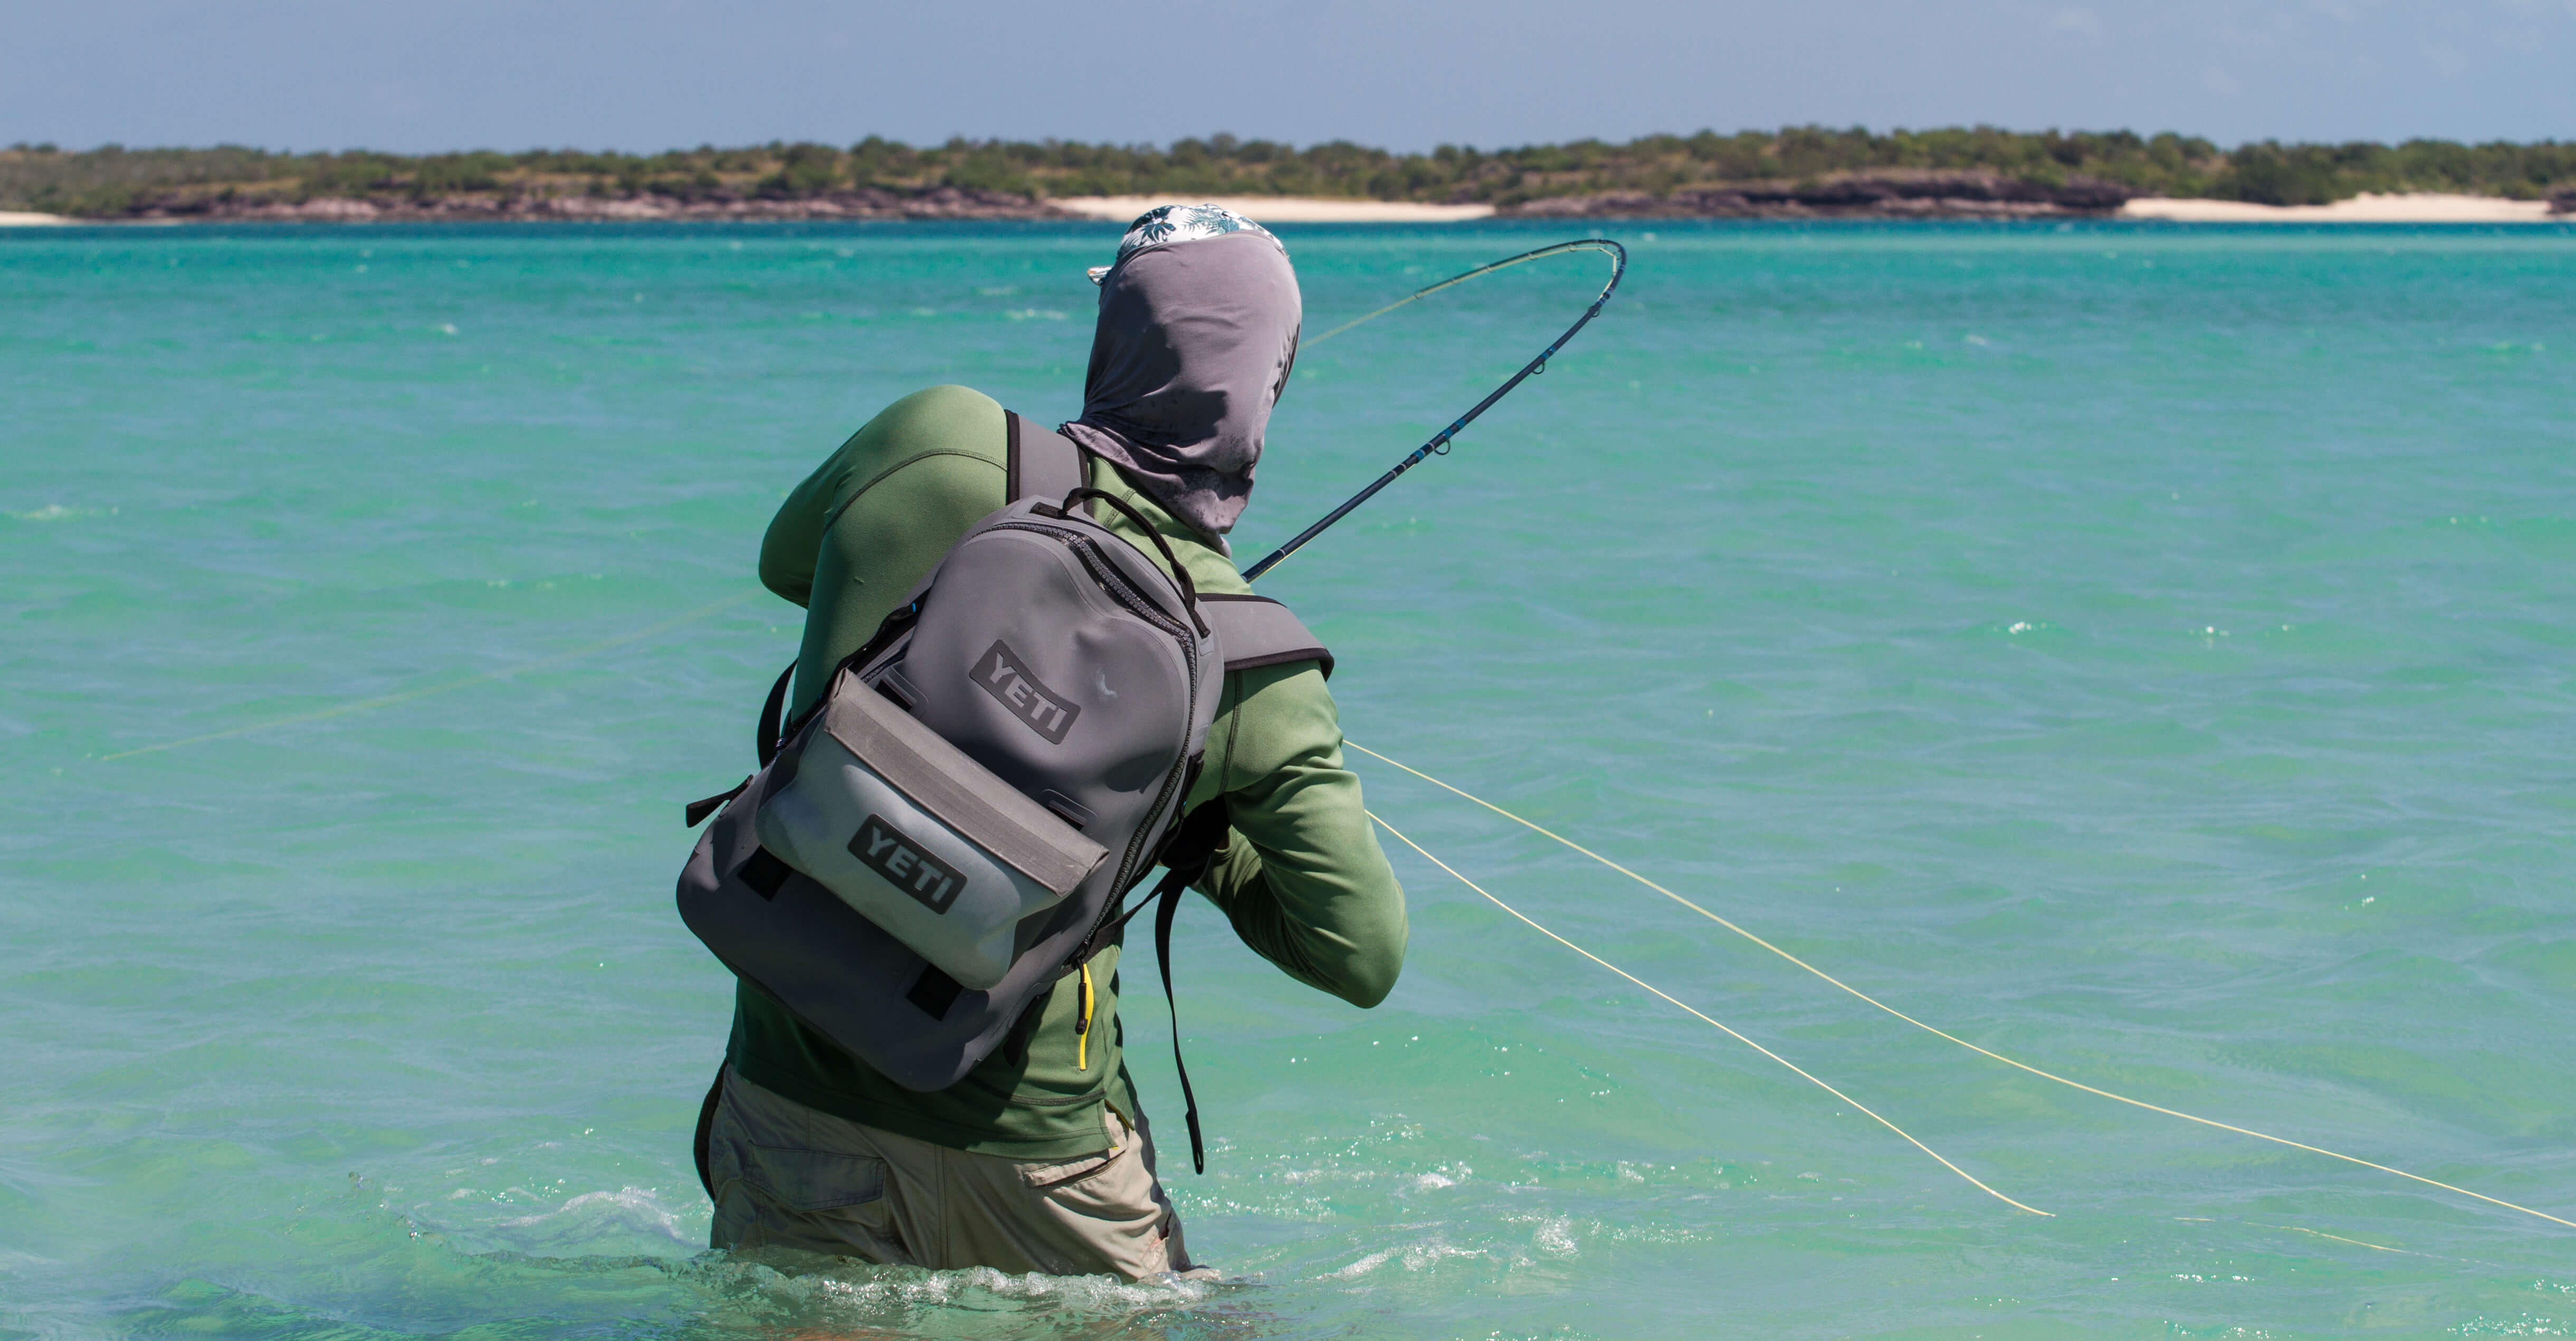 An individual standing in saltwater fly fishing